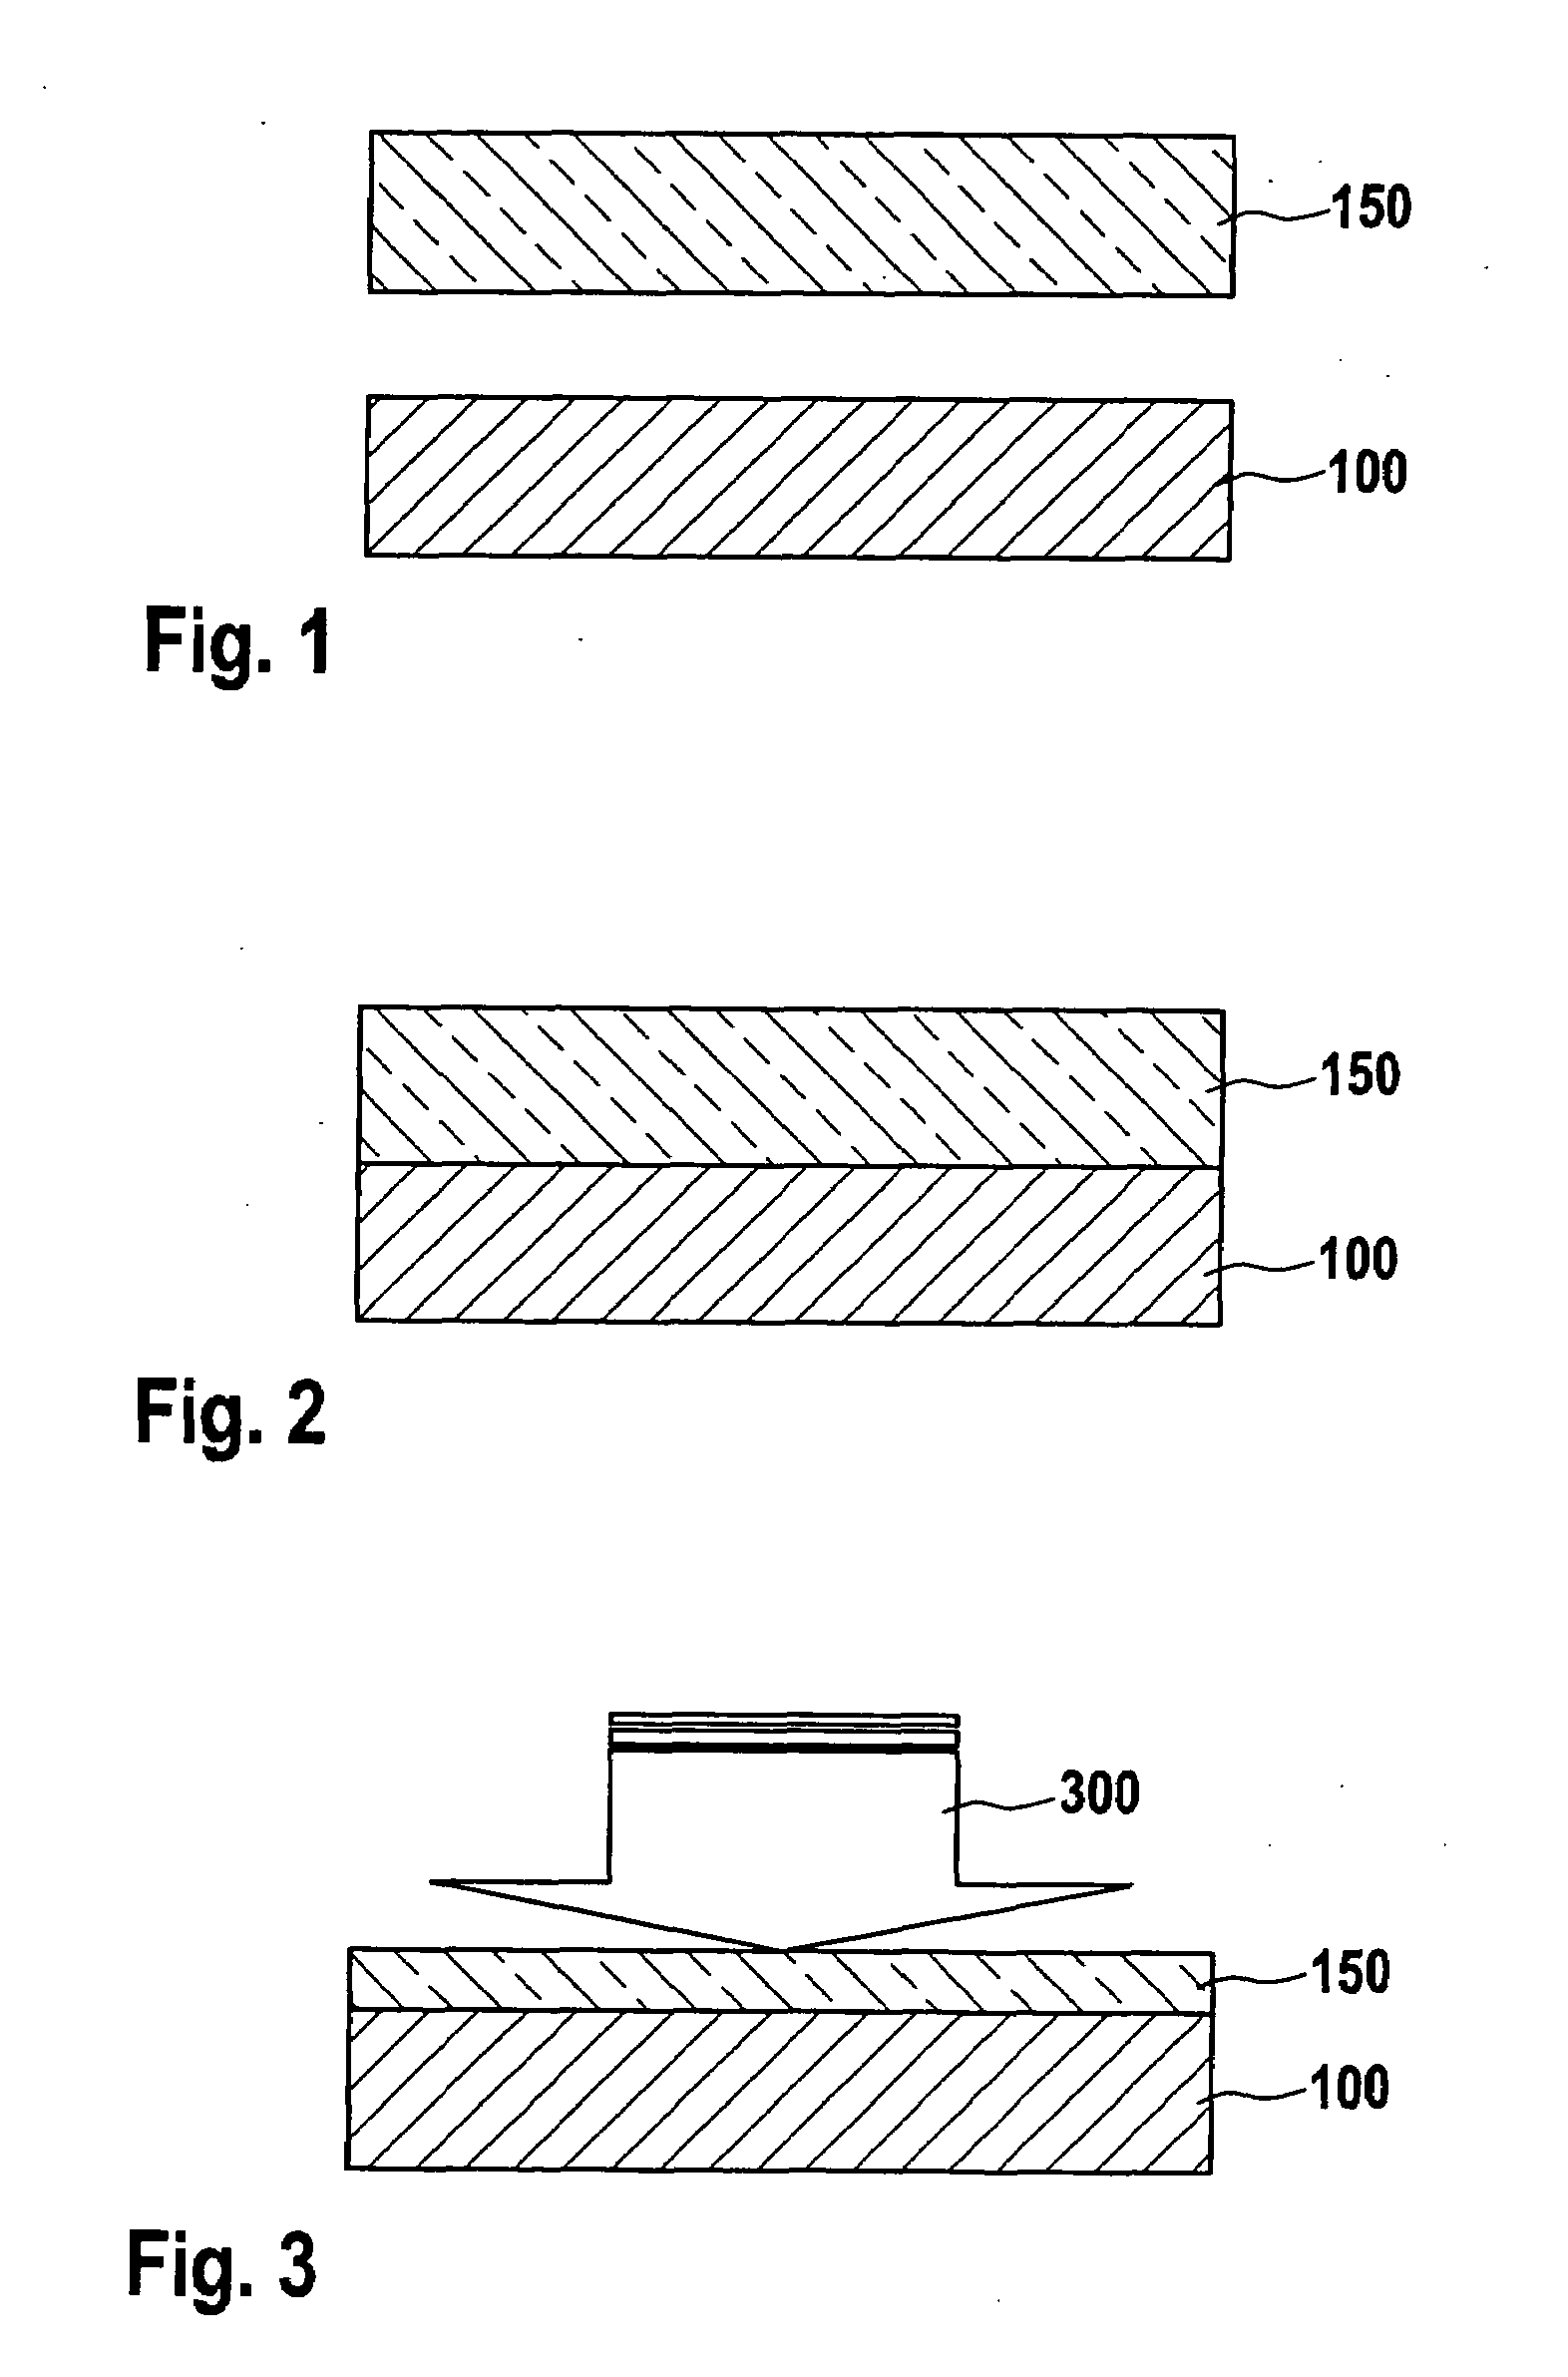 Micromechanical Component Having Multiple Caverns, and Manufacturing Method